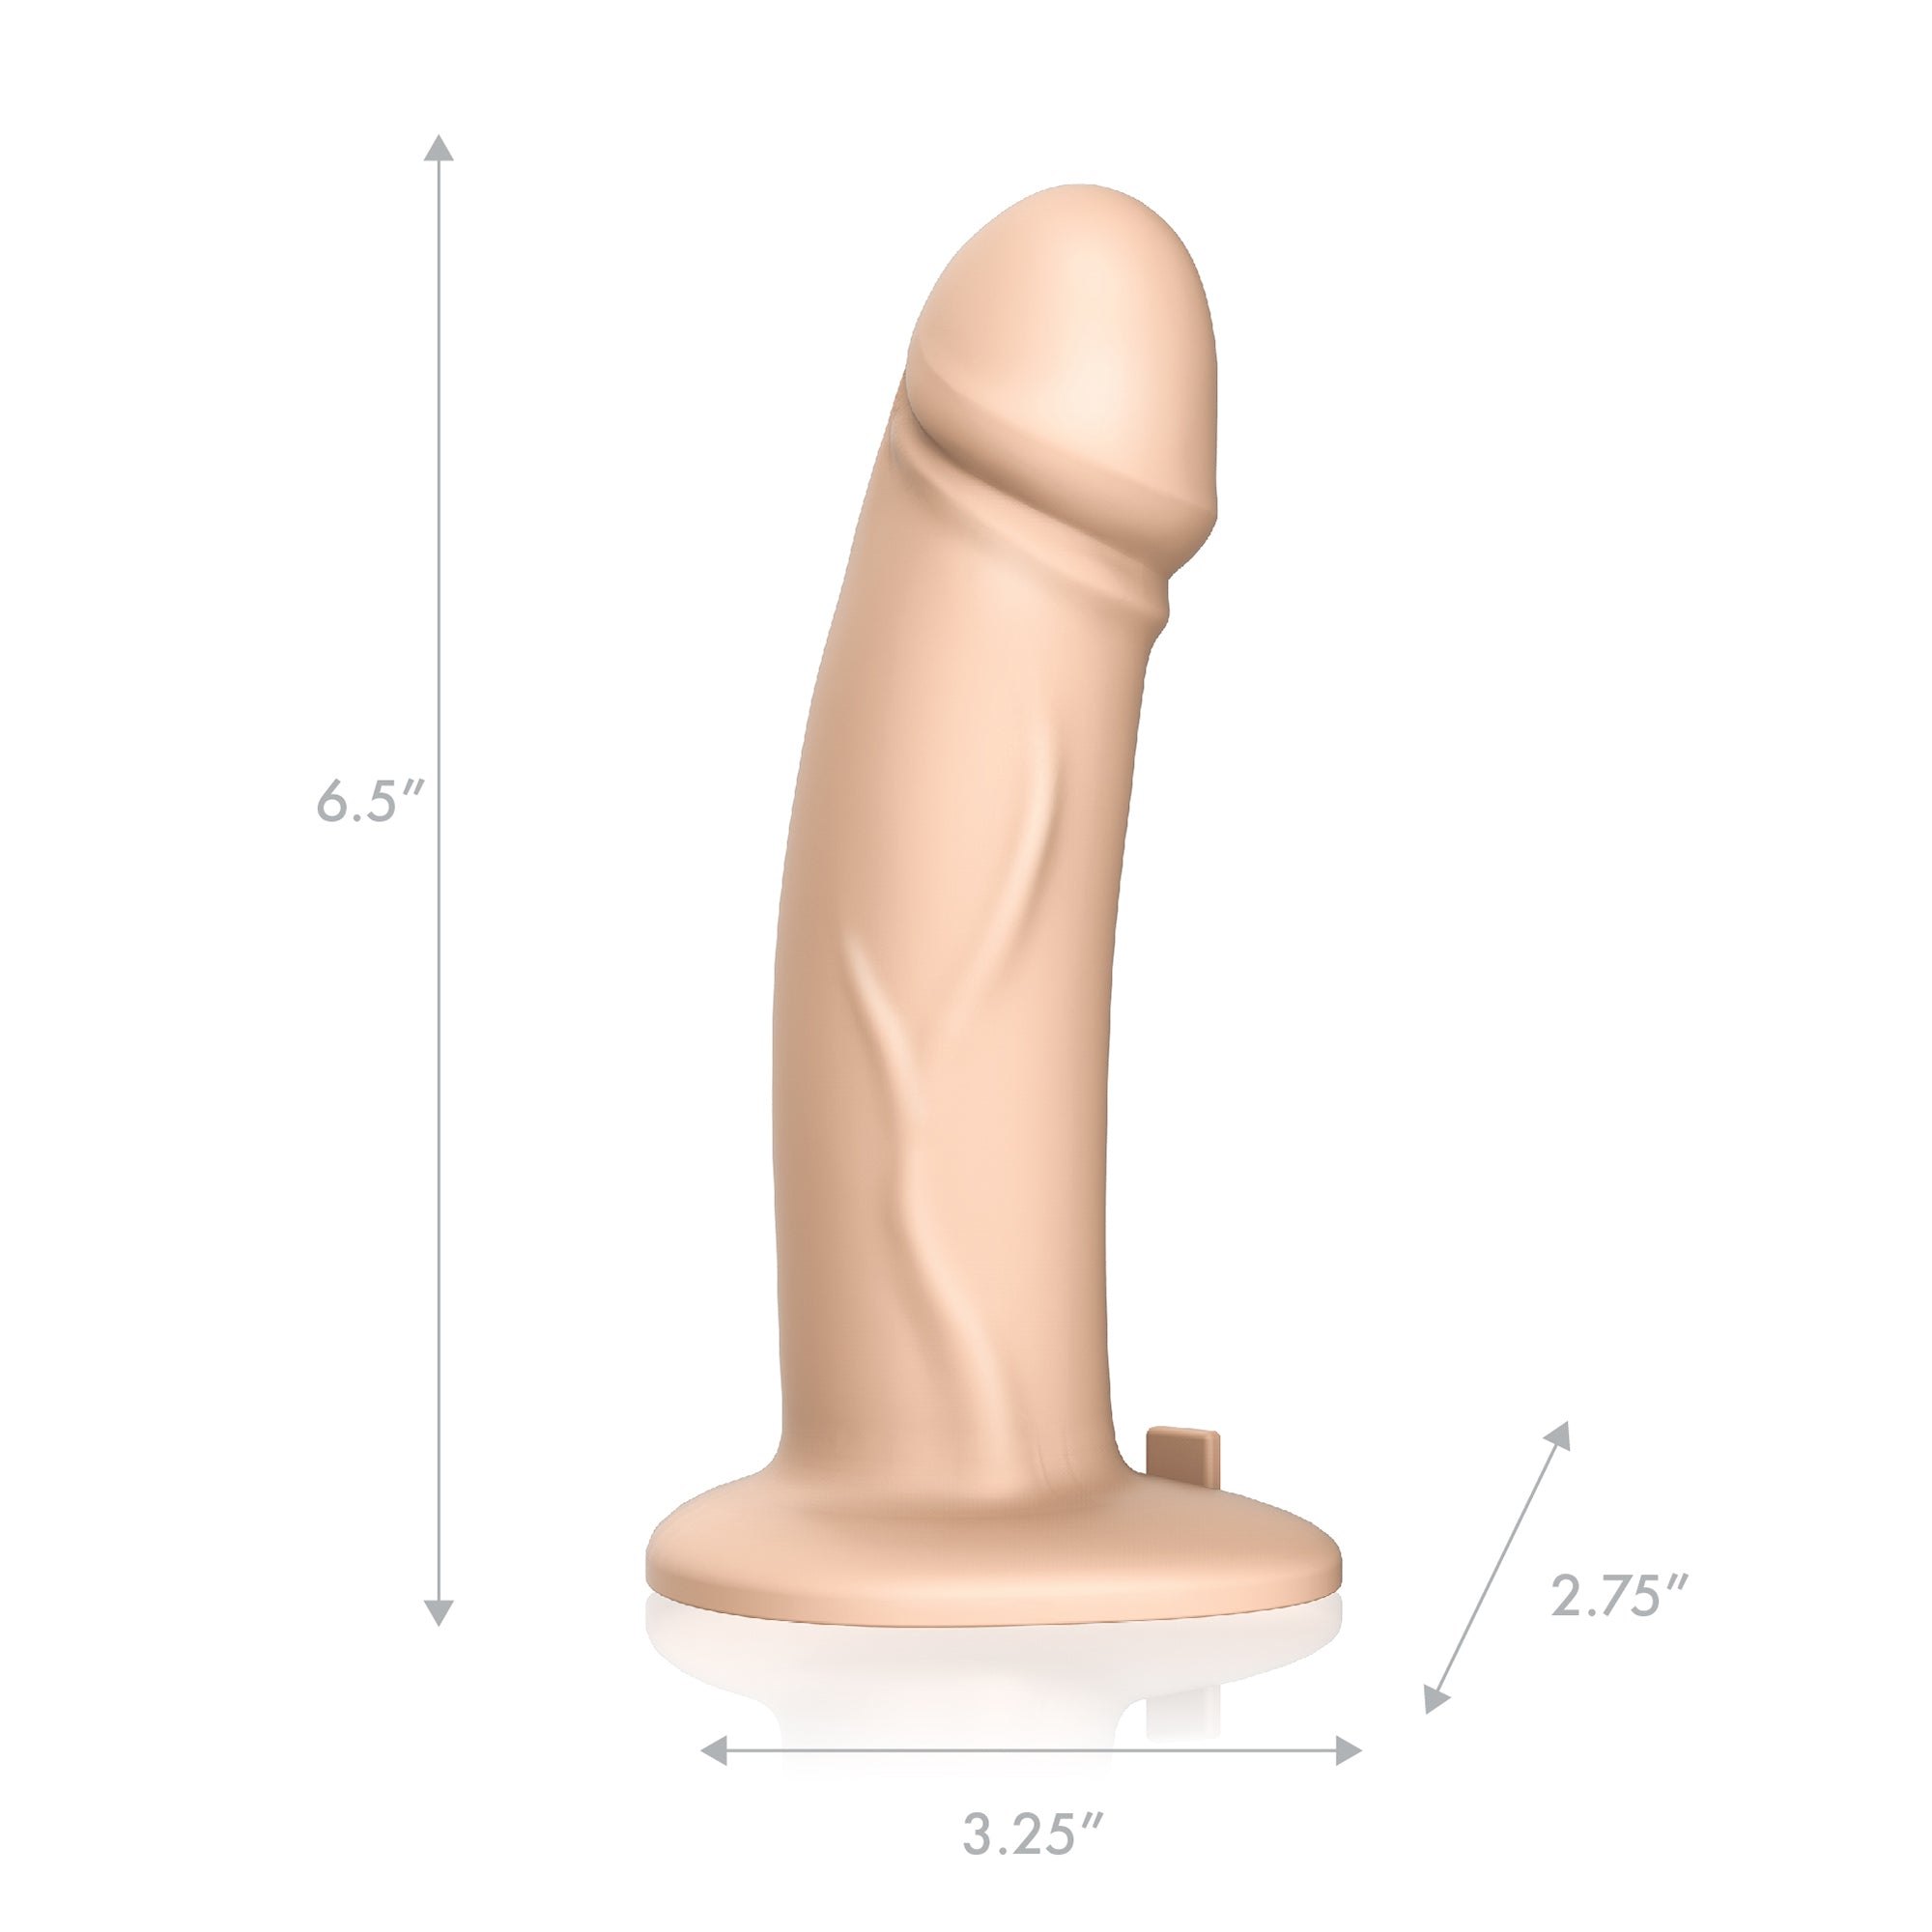 6.5” Realistic Silicone Dildo With Harness Included